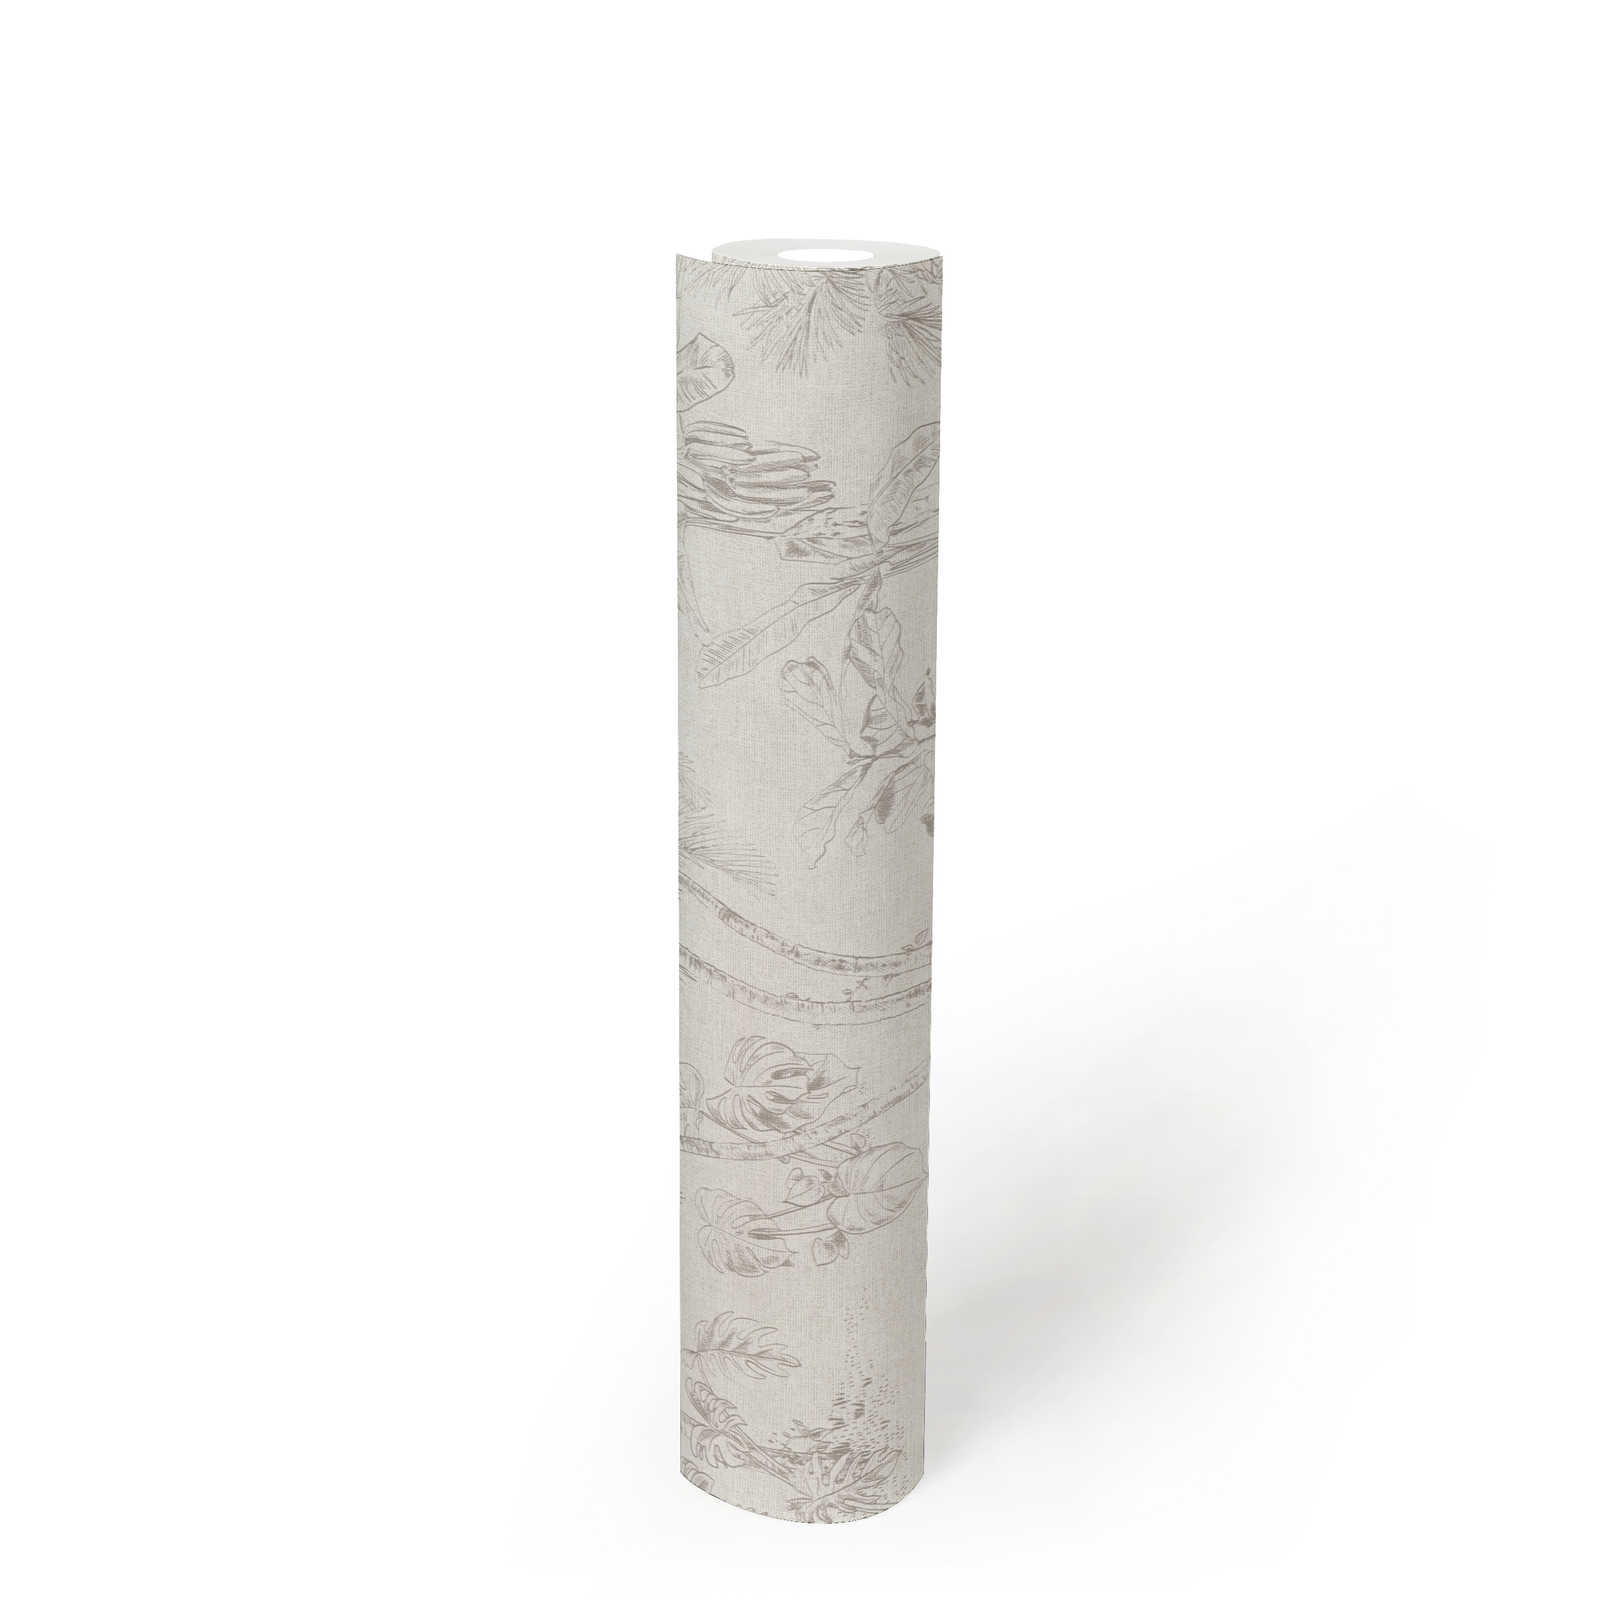             Jungle wallpaper with palm leaves & animal motif - beige, grey
        